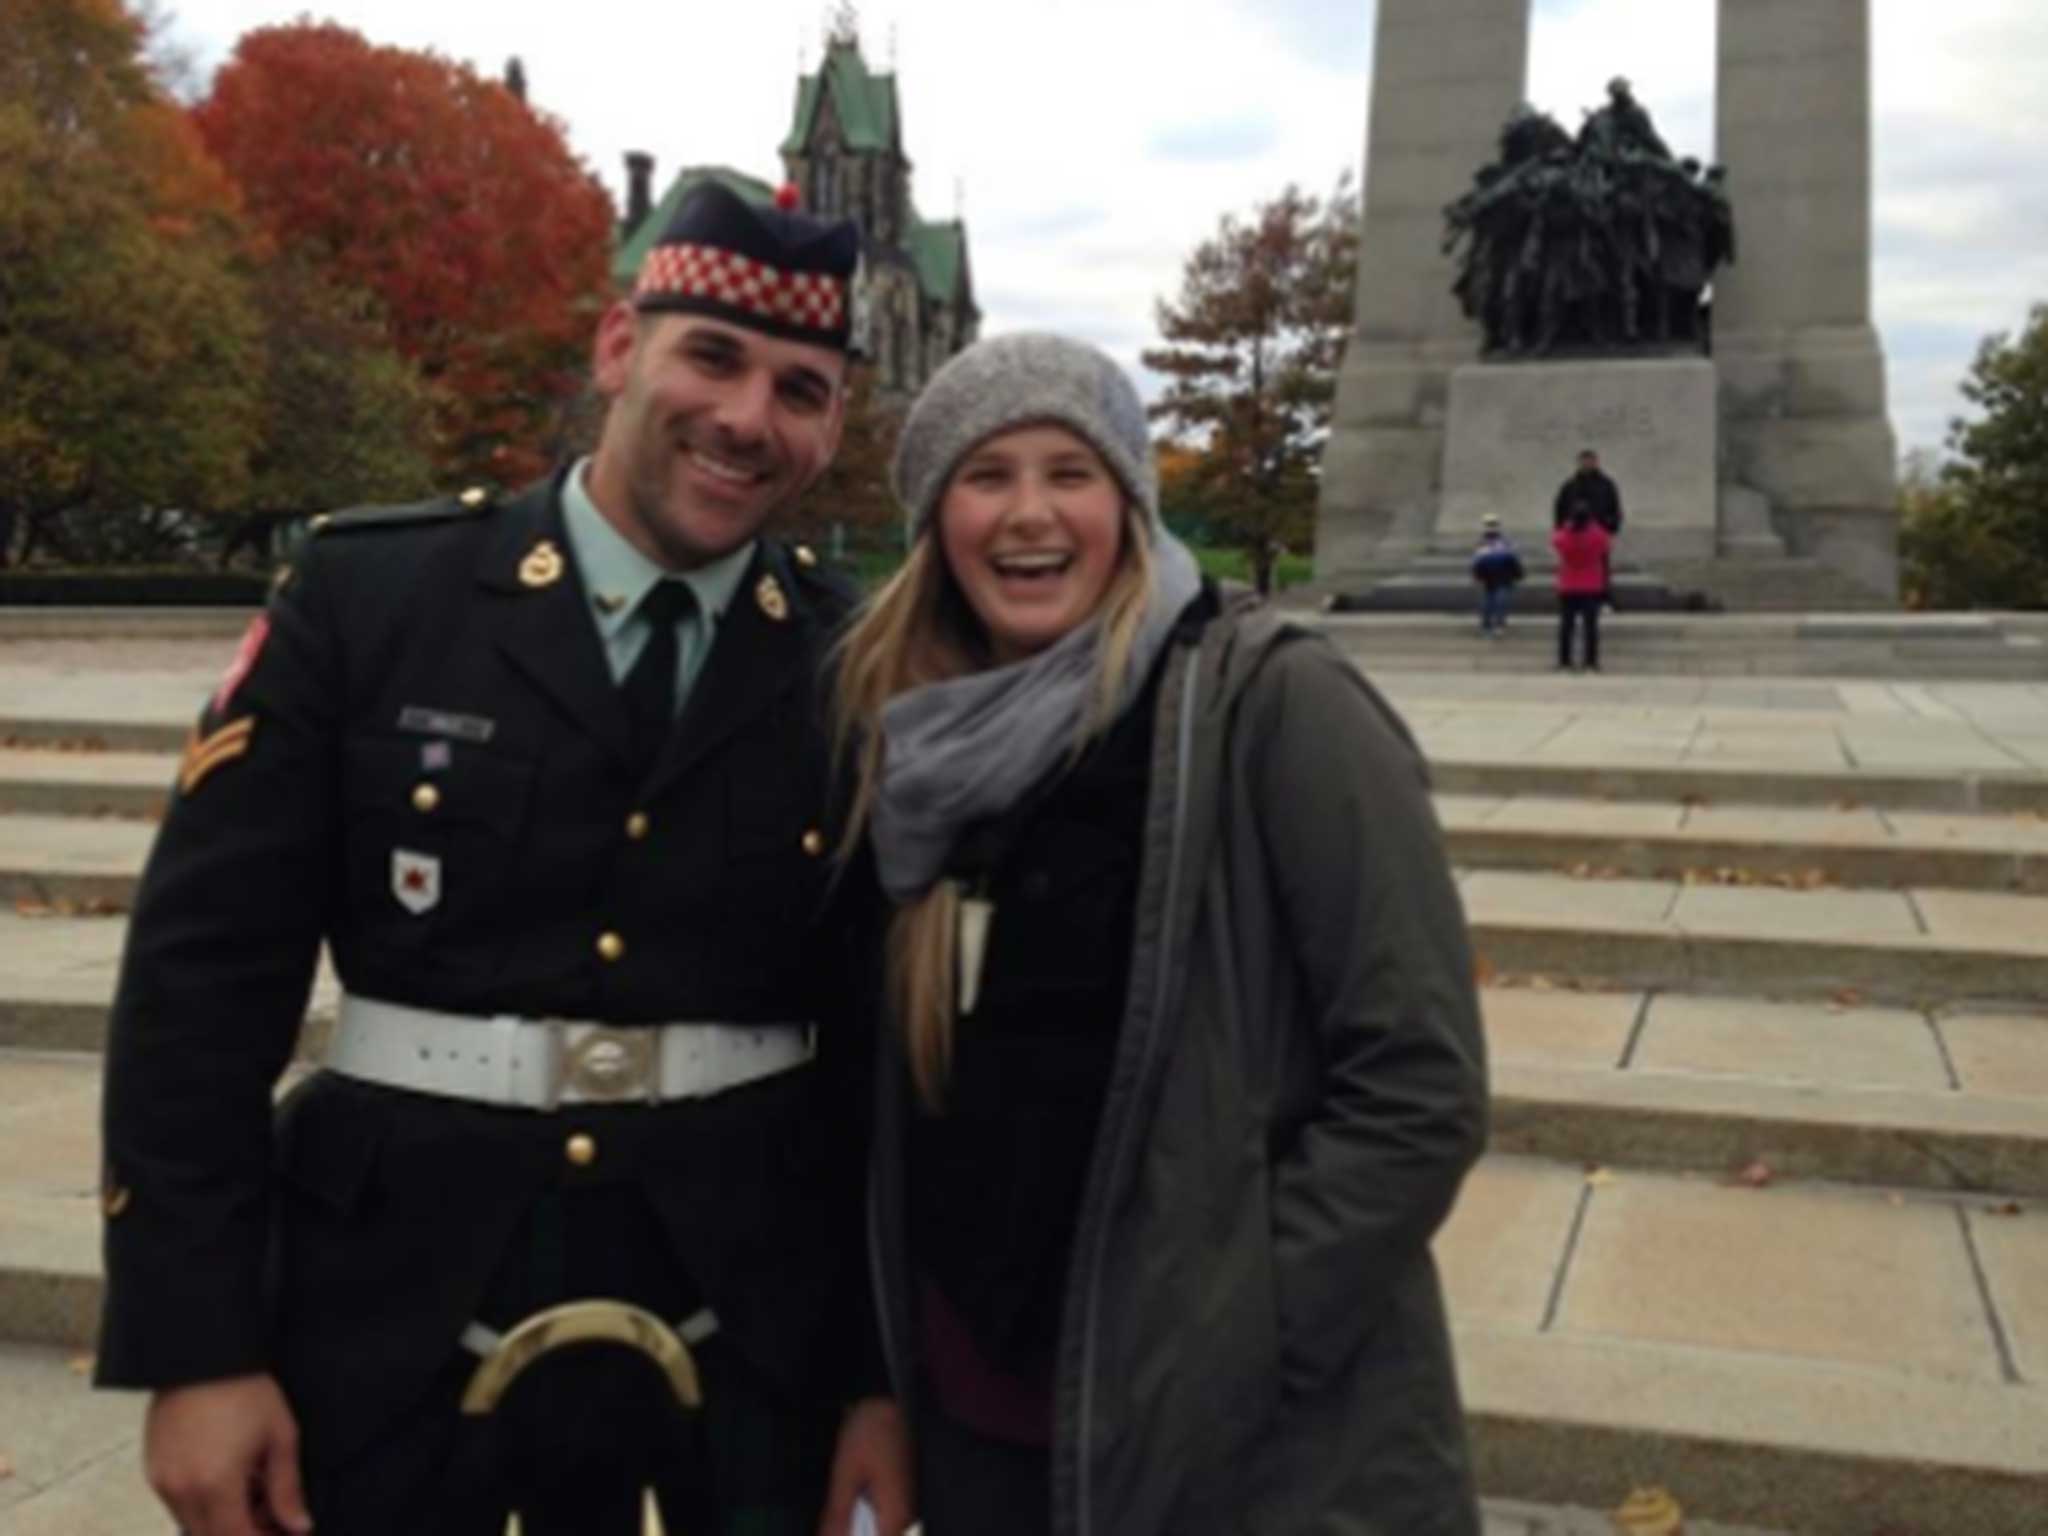 Tourist Megan Underwood posed with Mr Cirillo before the shooting